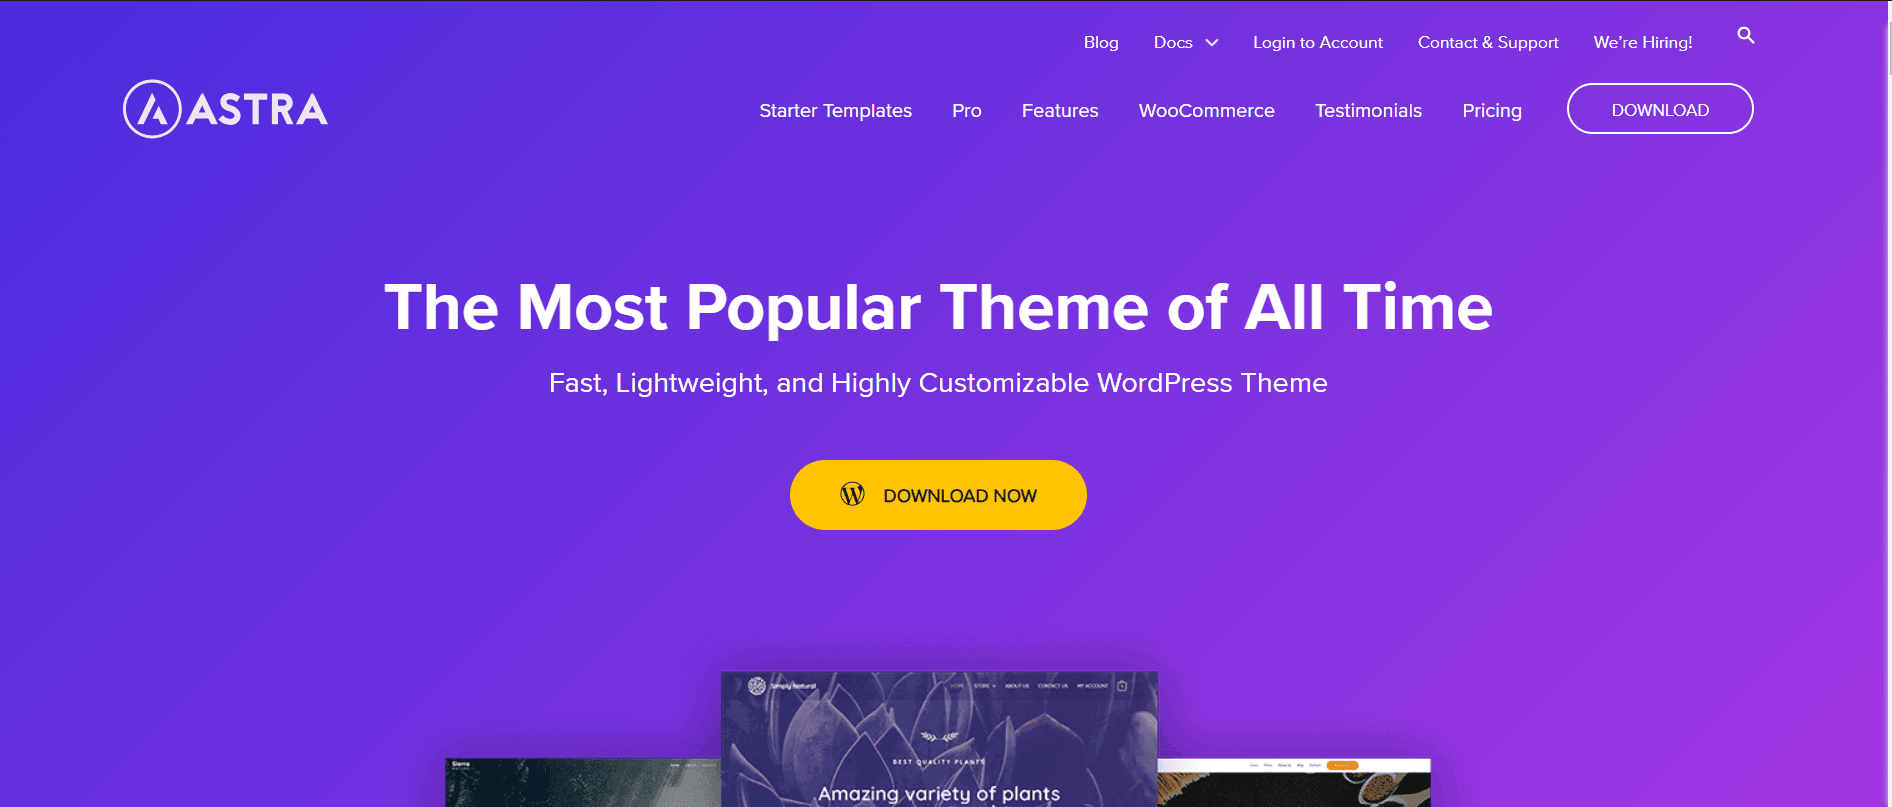 Homepage banner of Astra WordPress Theme site claiming 'The Most Popular Theme of All Time' with a purple color theme and buttons for downloading.